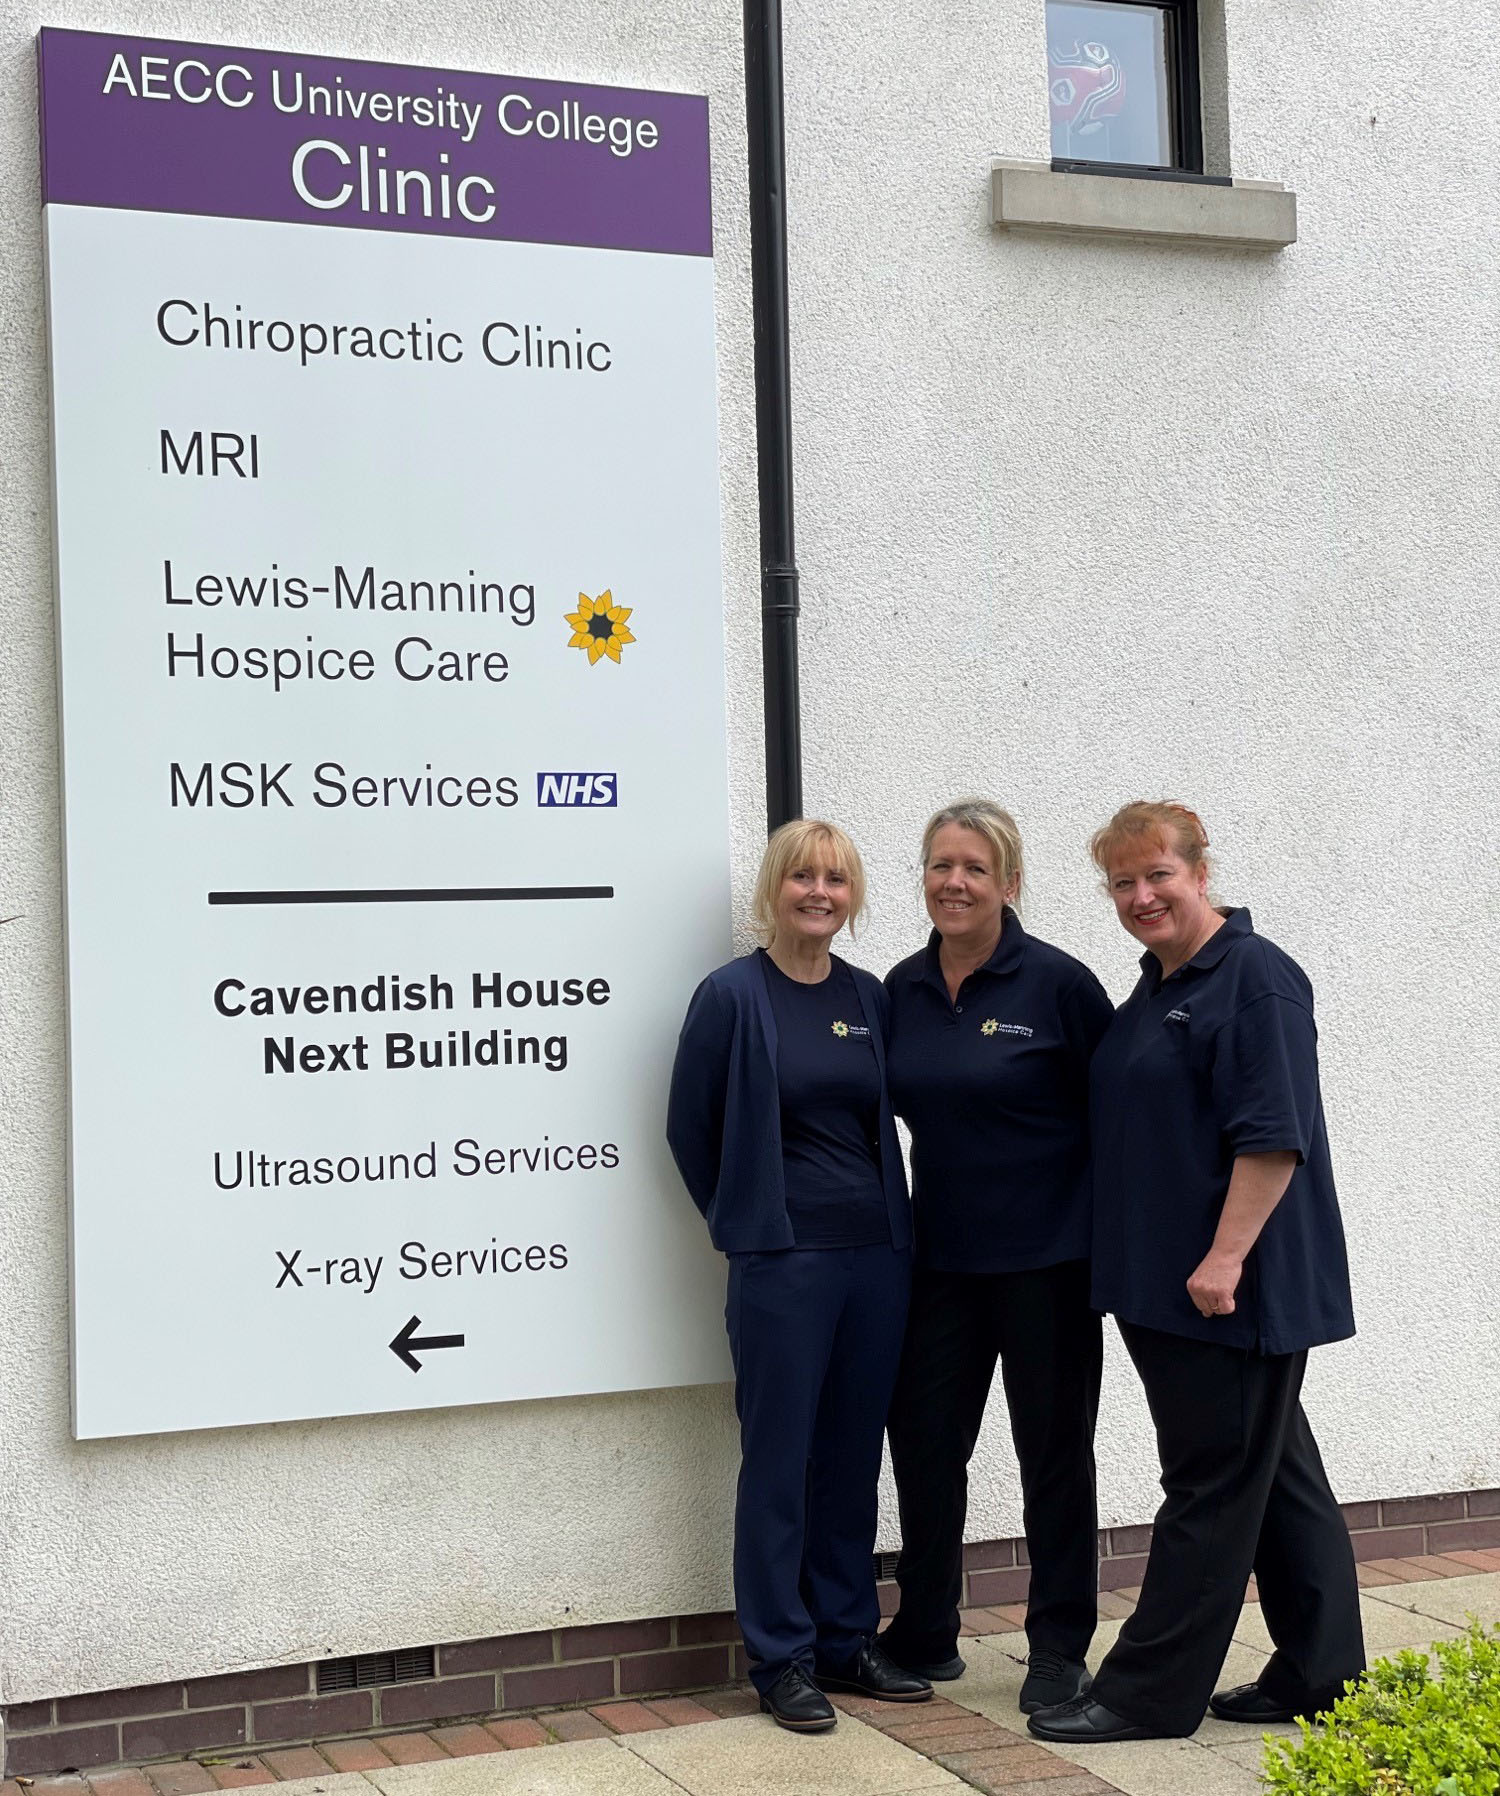 Lewis-Manning Hospice Care launches new Lymphoedema service at AECC University College in Boscombe